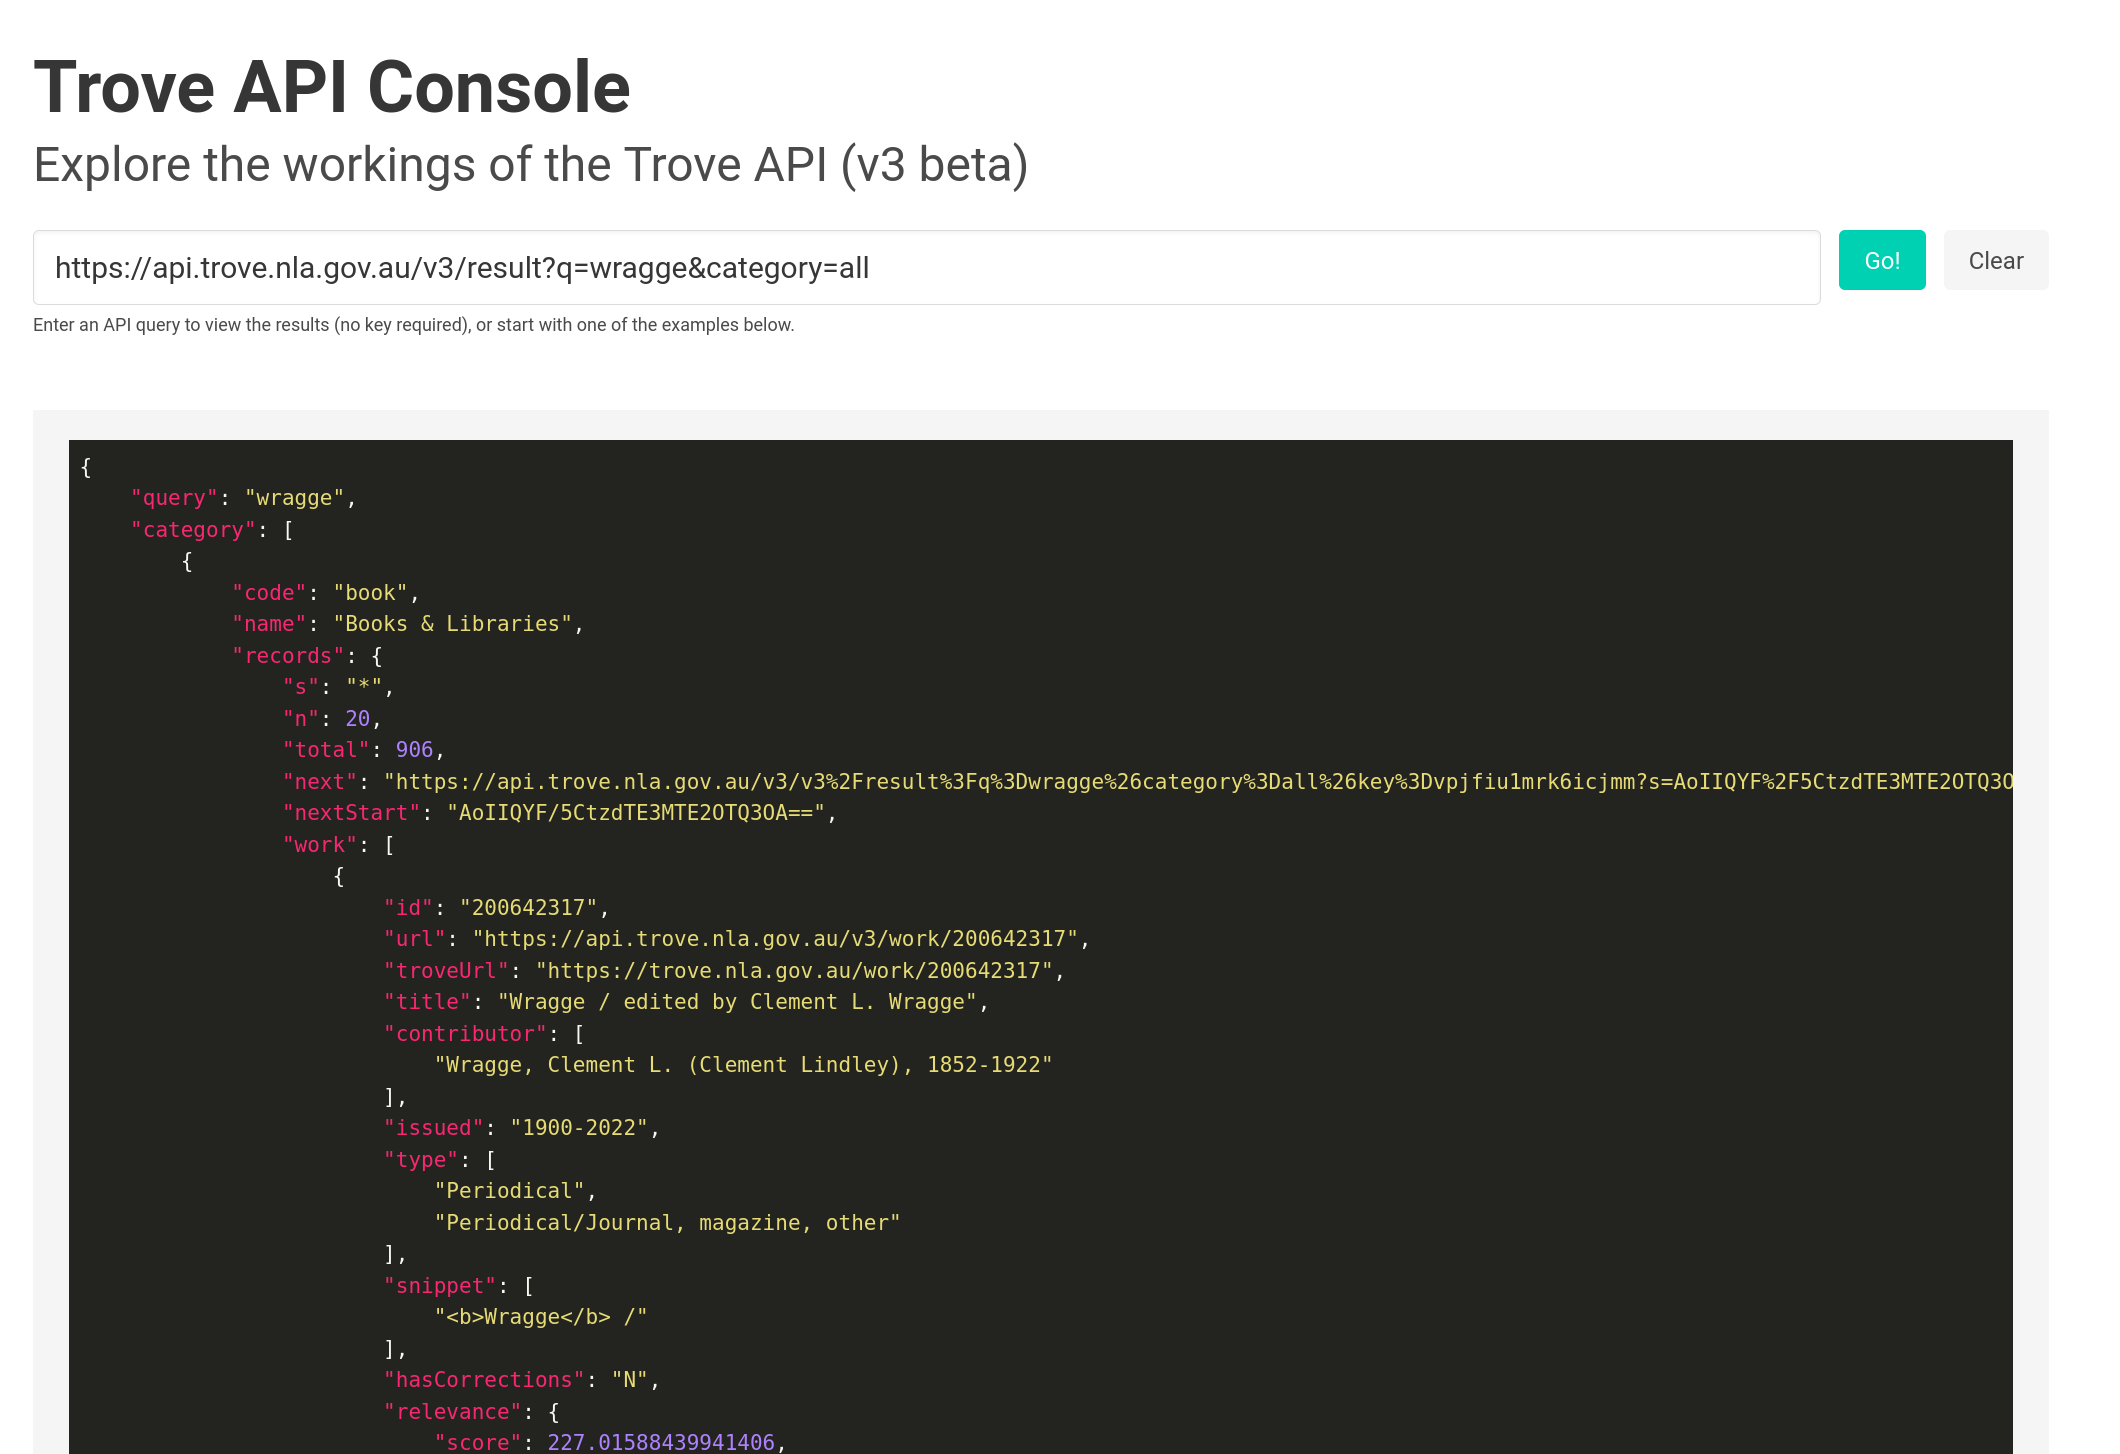 Screenshot of the new v3 beta section of the Trove API Console